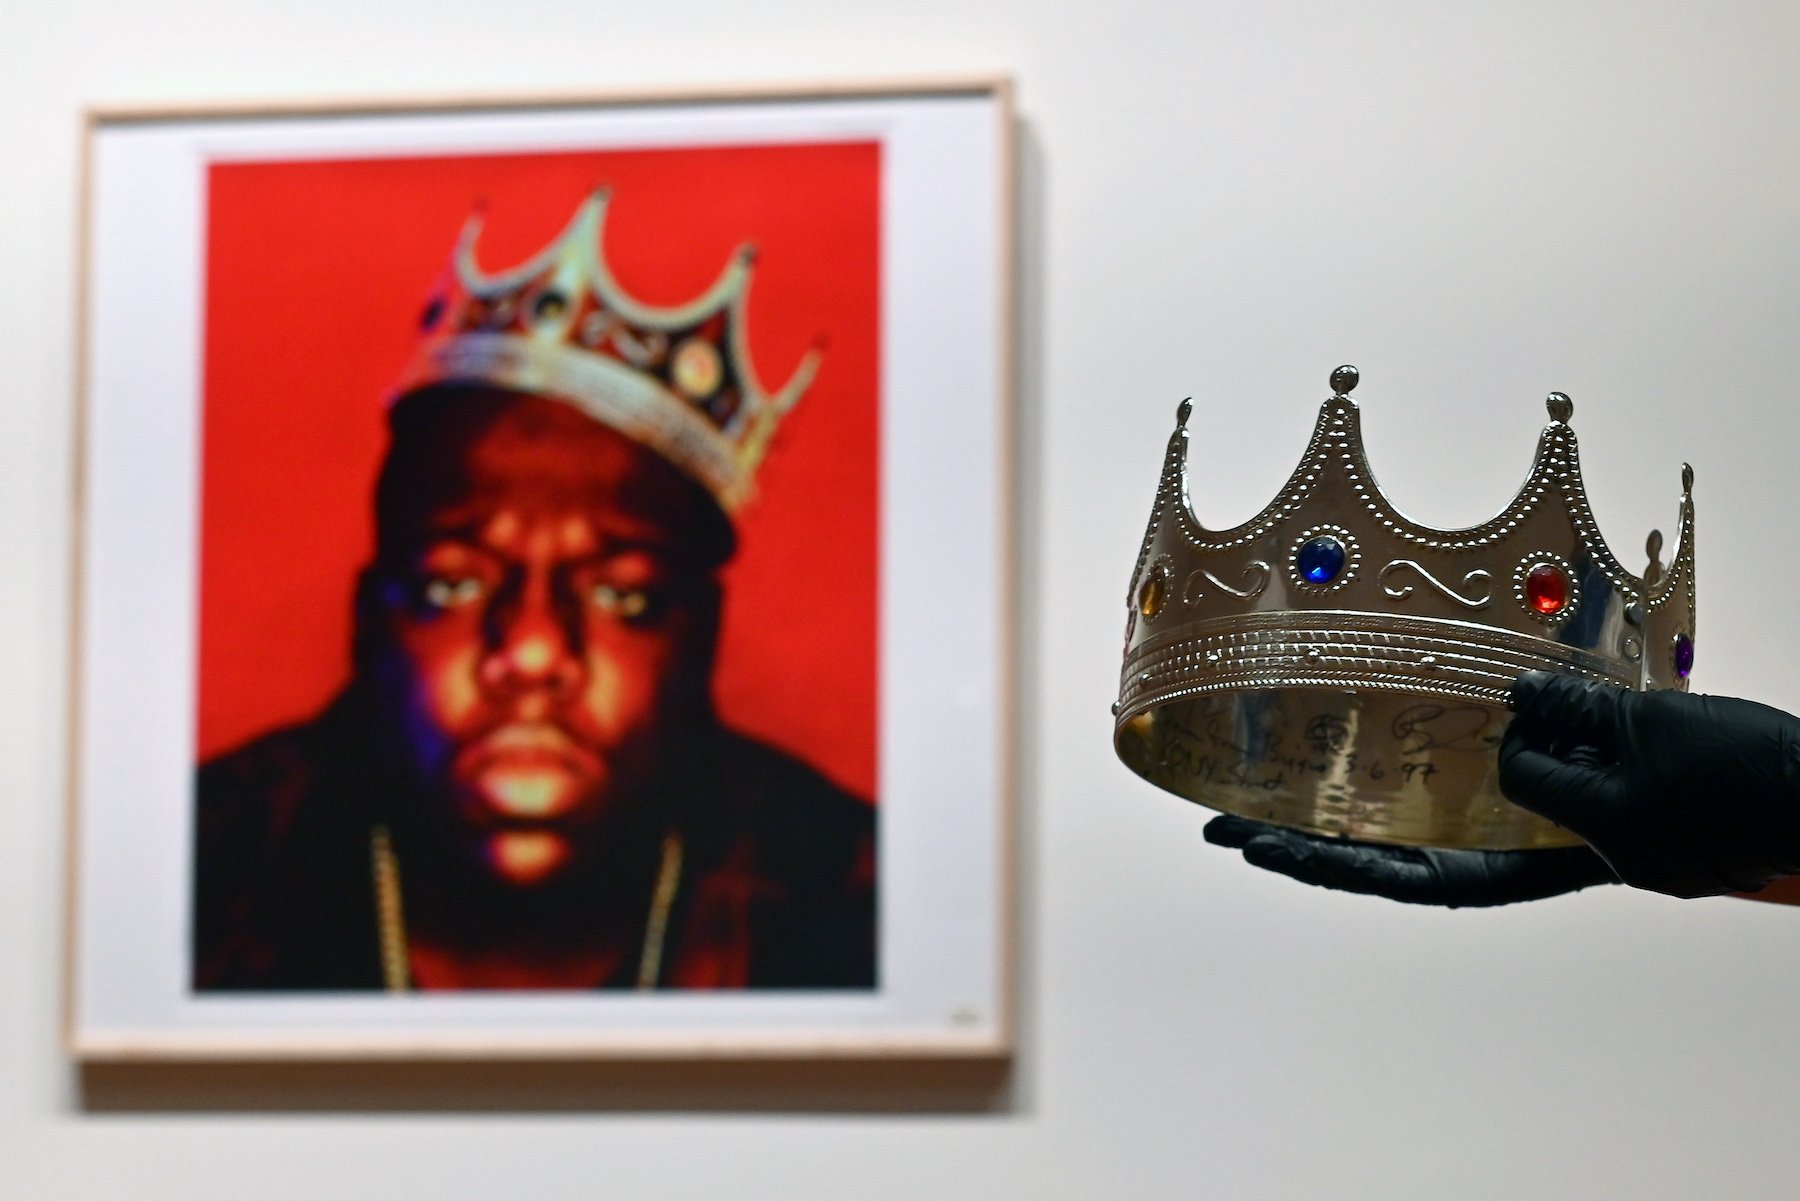 A portrait of The Notorious B.I.G. wearing a crown, next to the actual crown